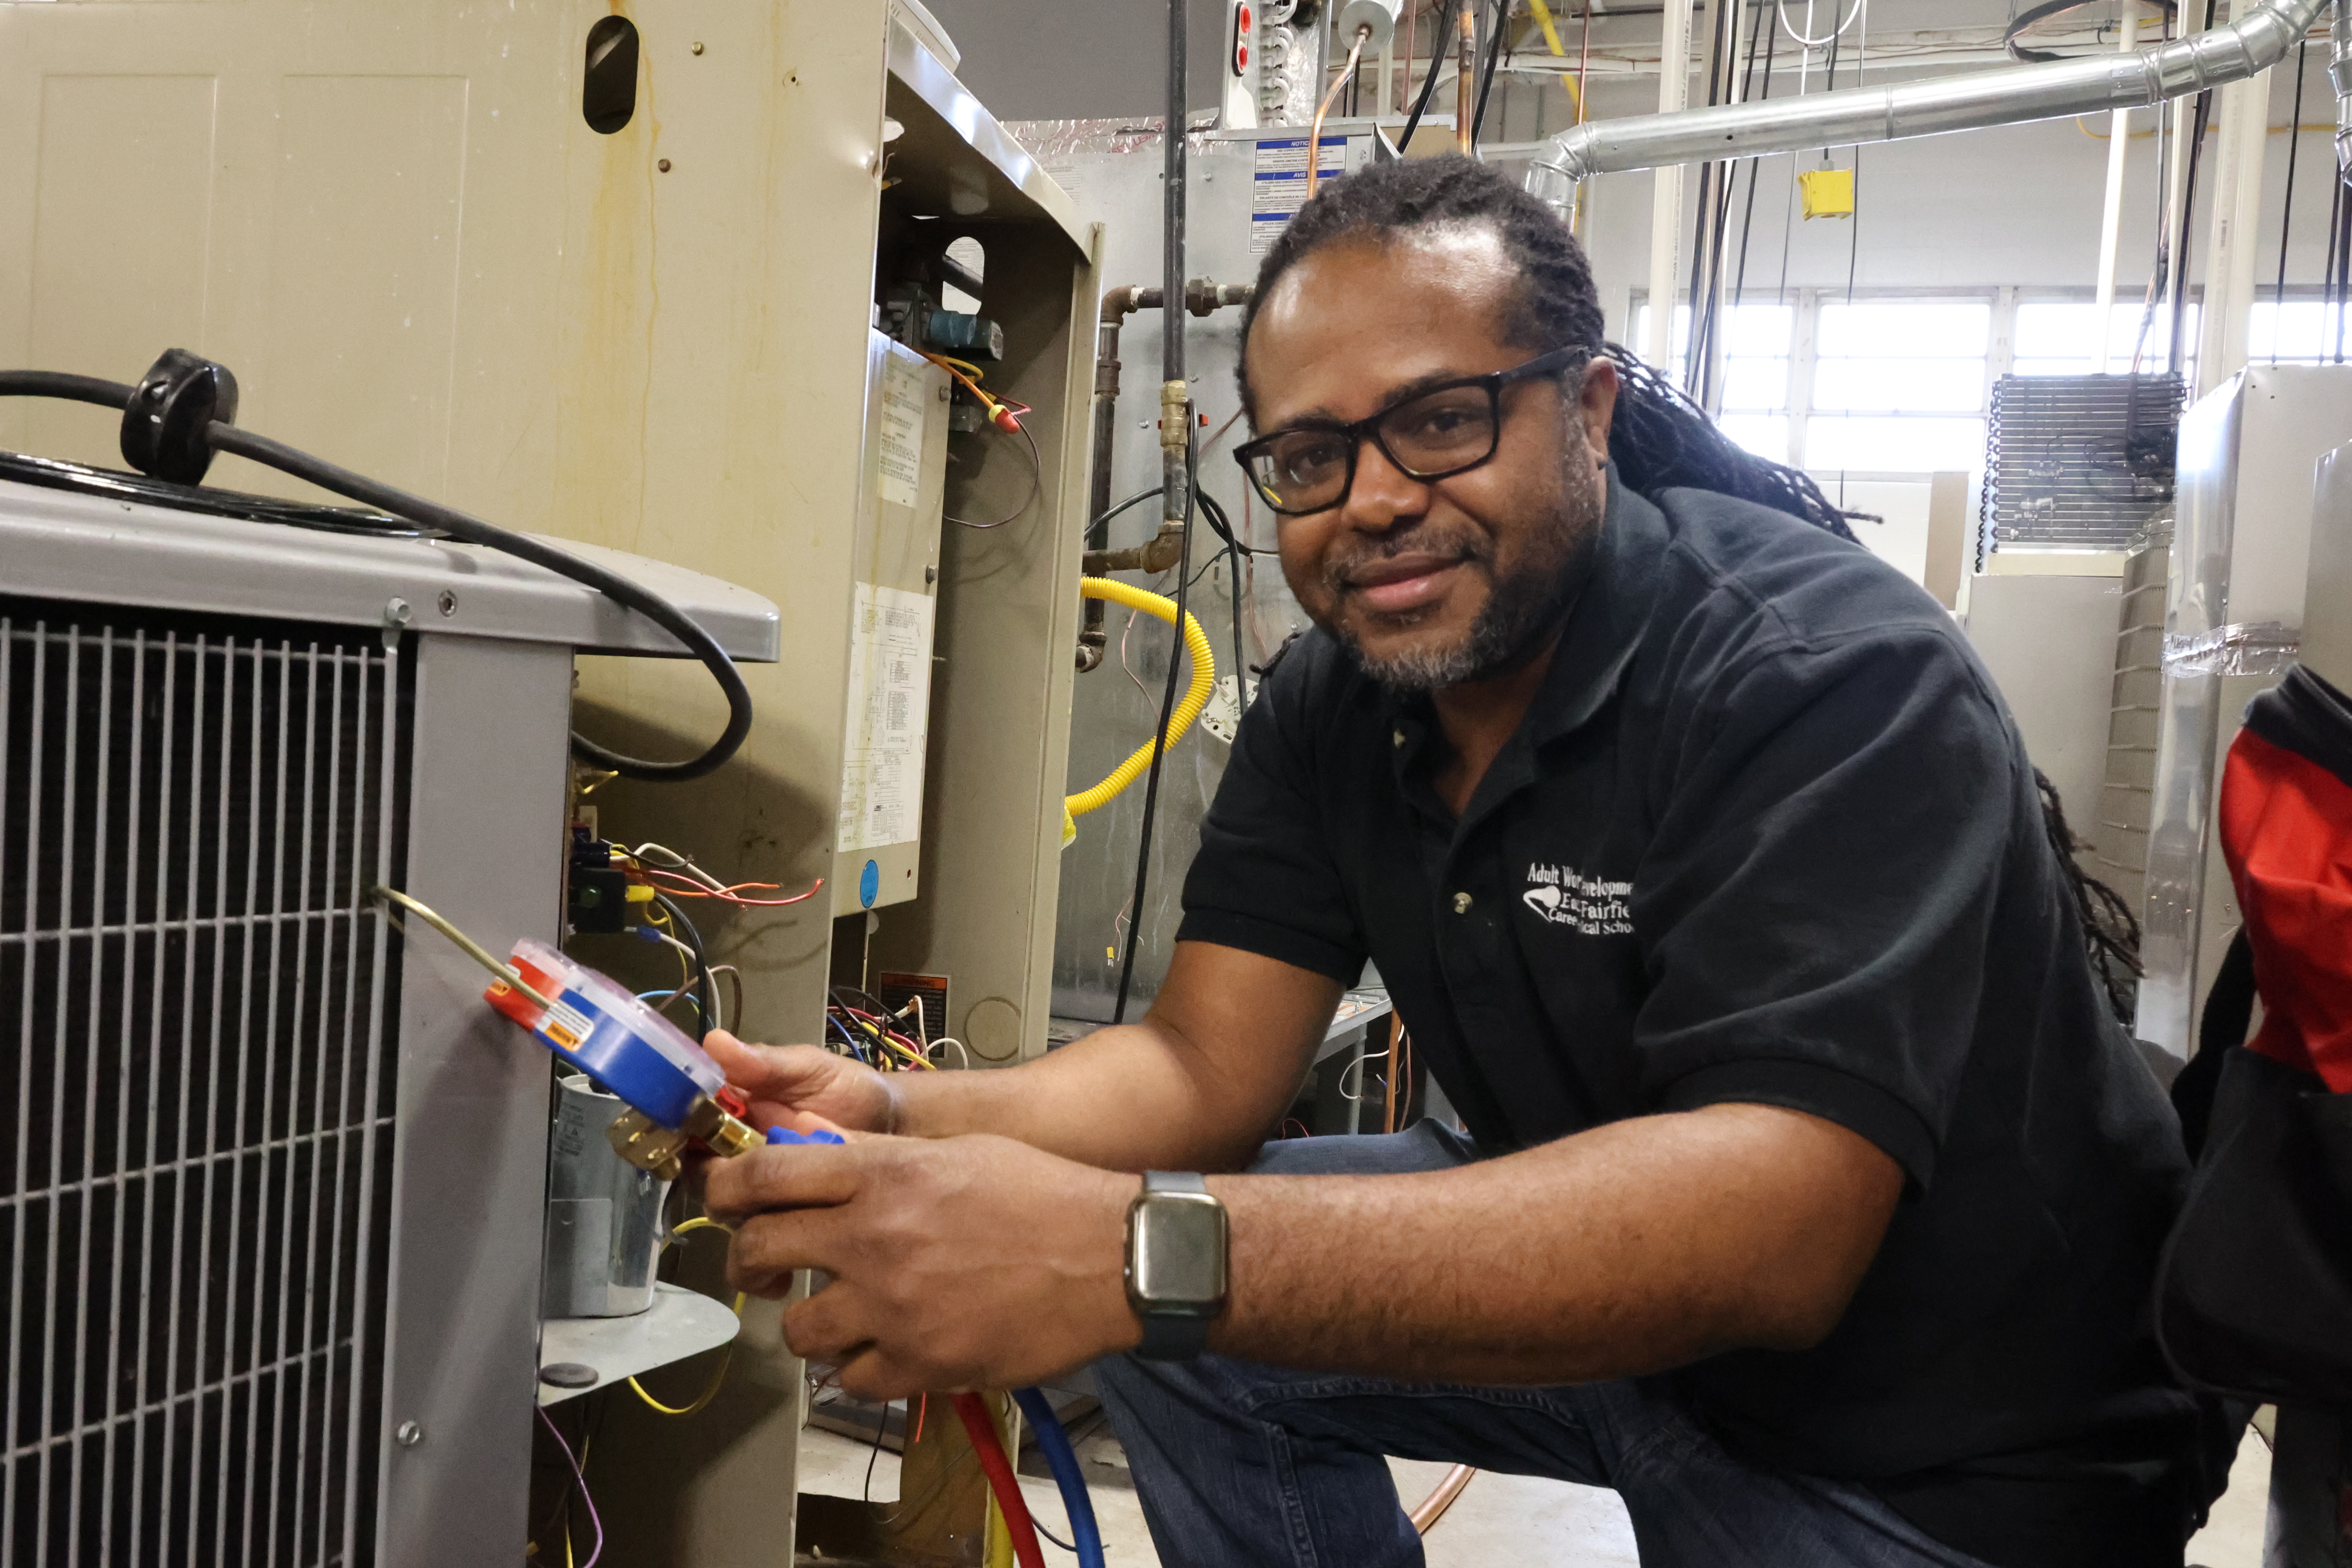 A Black male poses to the side of an air conditioning unit in his HVAC program lab.